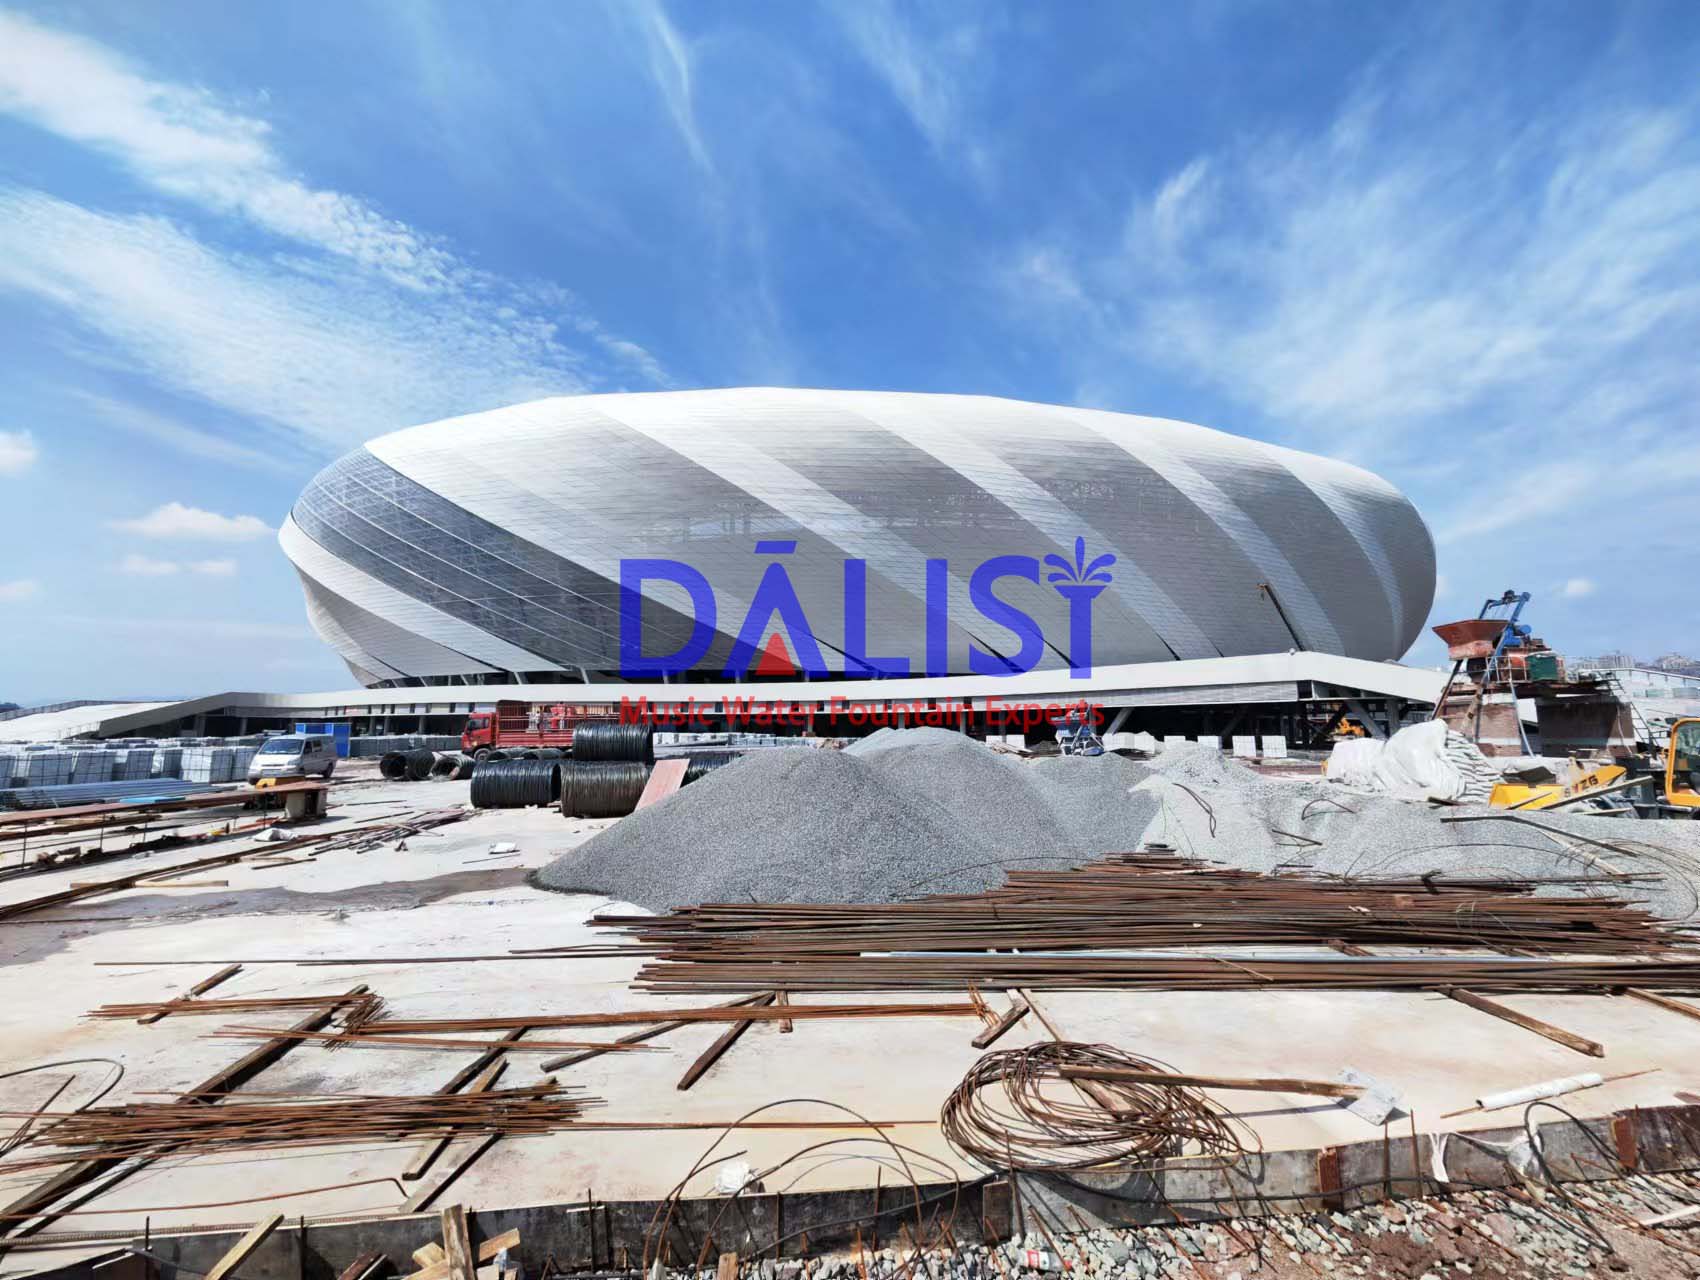 World Cup Football Stadium Large-scale Musical Dancing Water Show Project in full swing